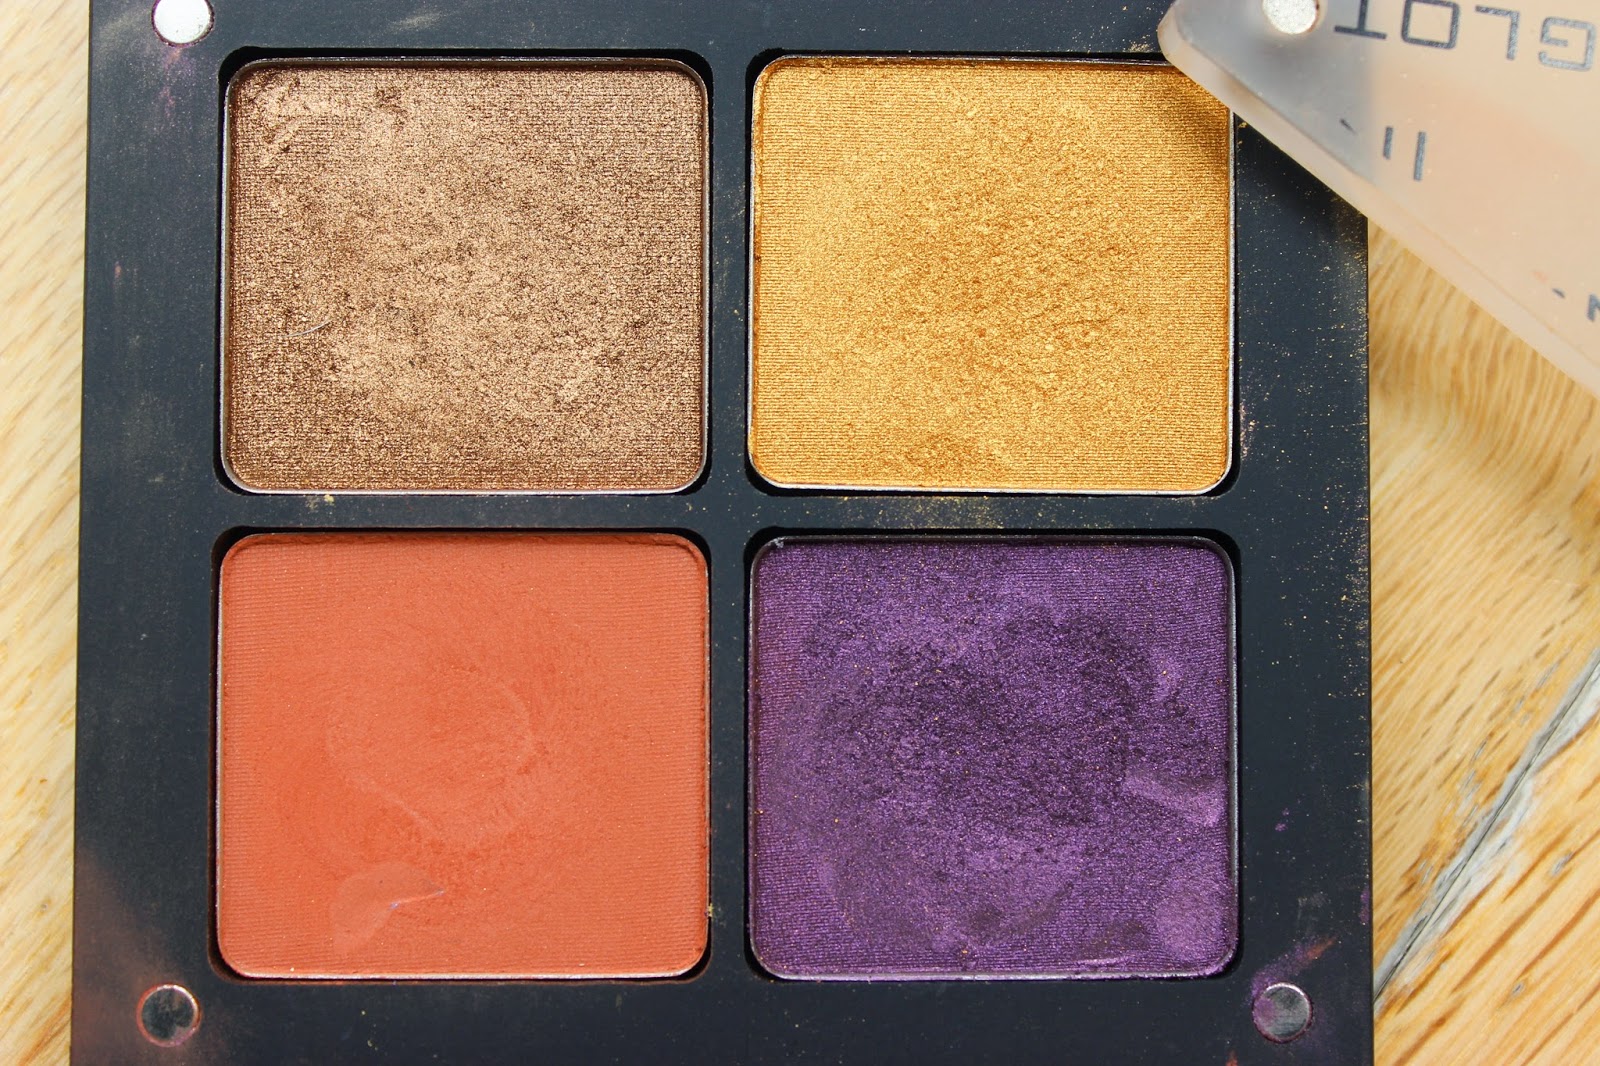 Inglot Eyeshadow Swatches Freedom System Discoveries Of Self Blog NC50 UK Beauty Blogger